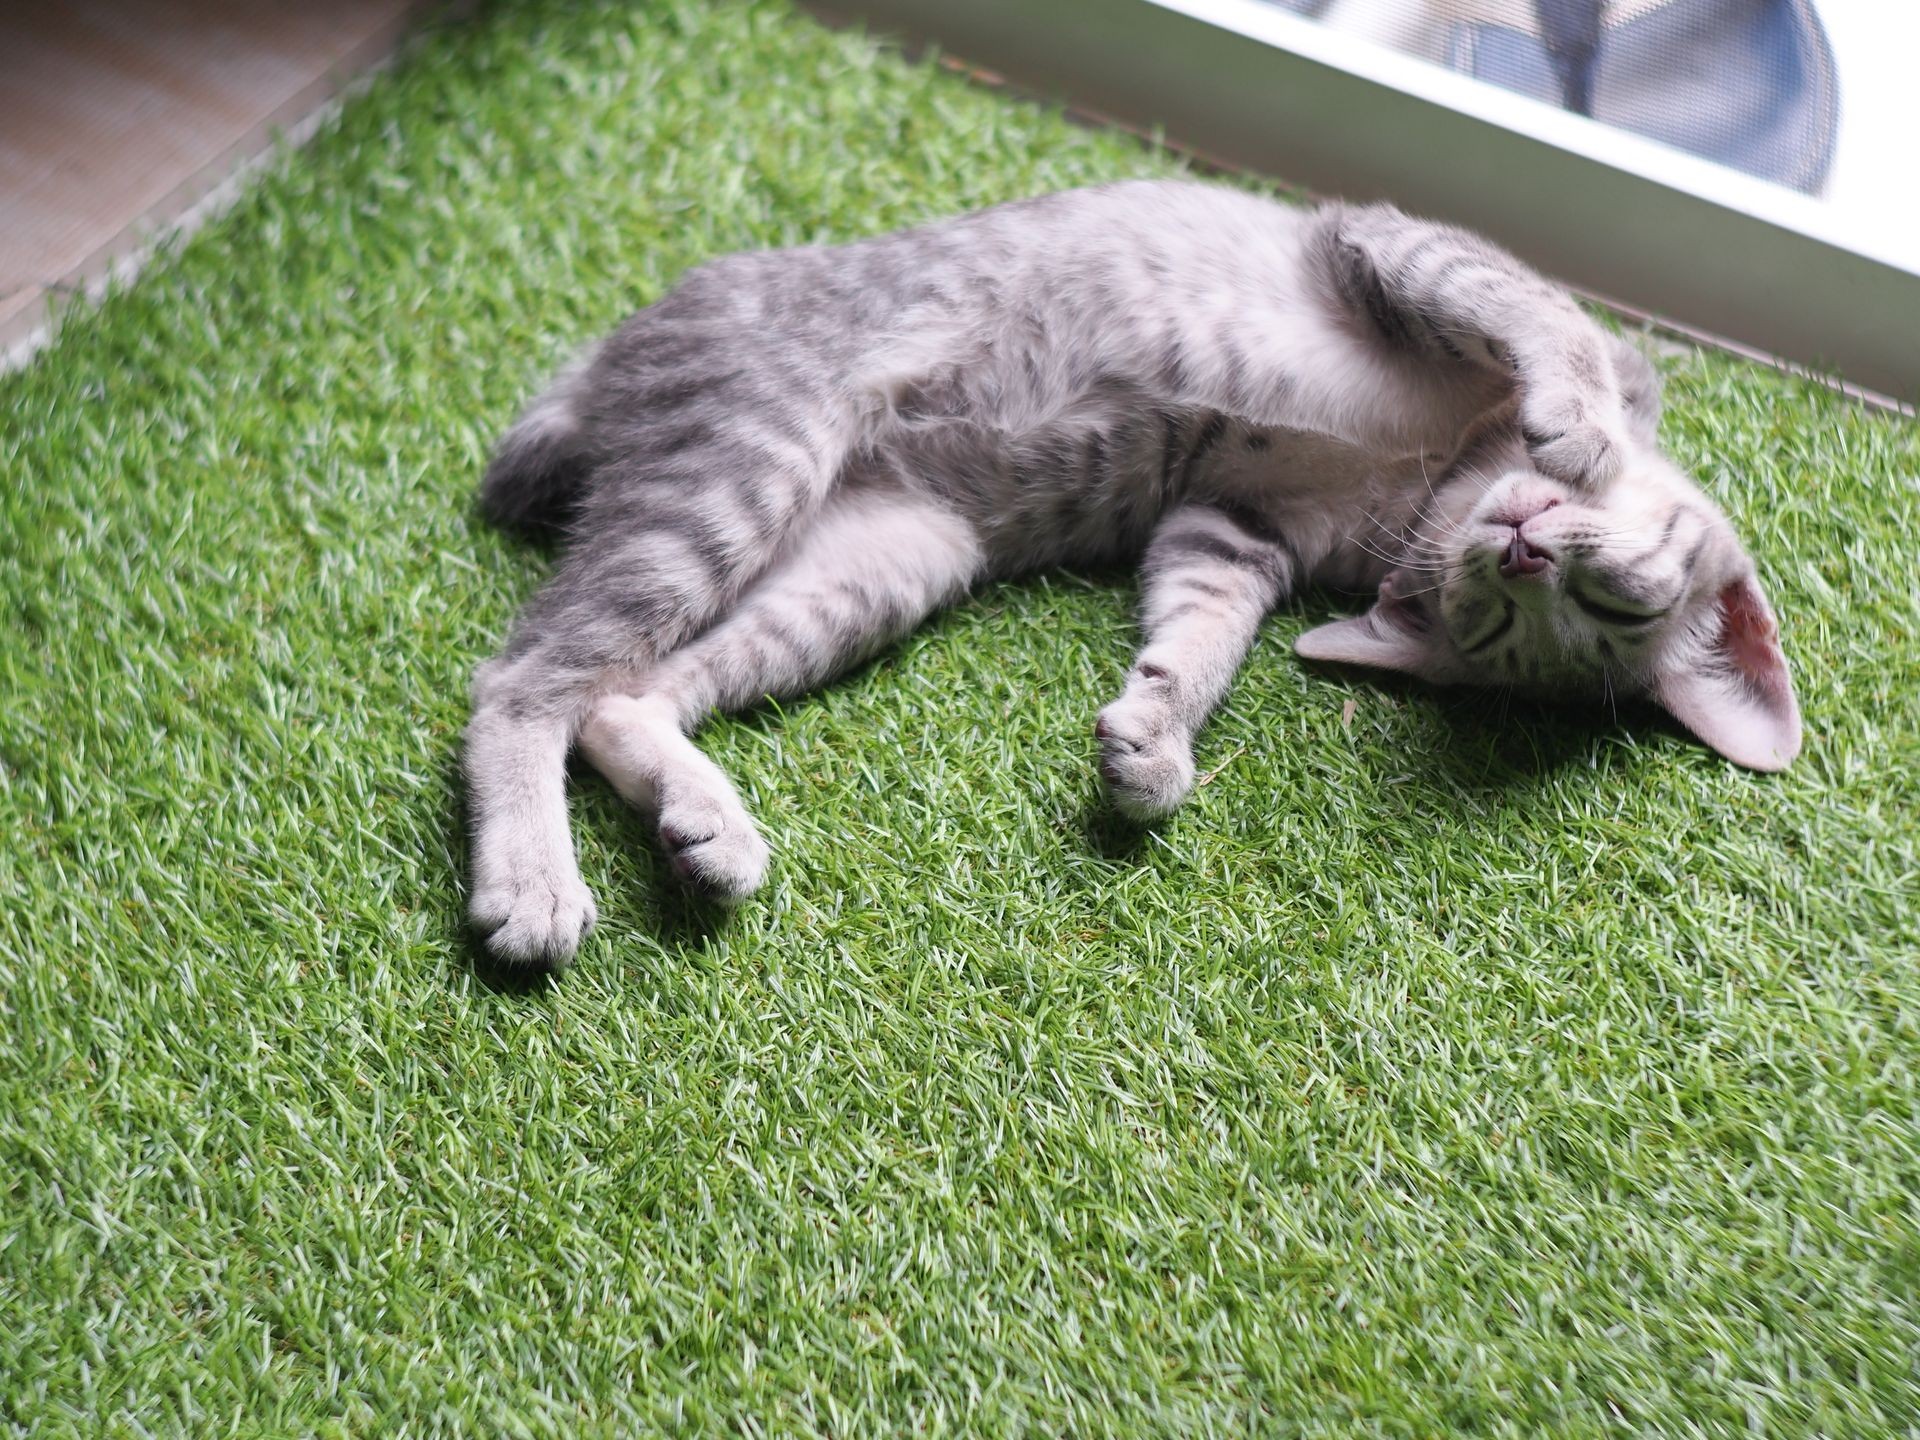 cute short hair young asian kitten grey and white stripes home cat relaxing lazy on green synthetic grass mat on house floor making funny posture portrait shot selective focus blur background